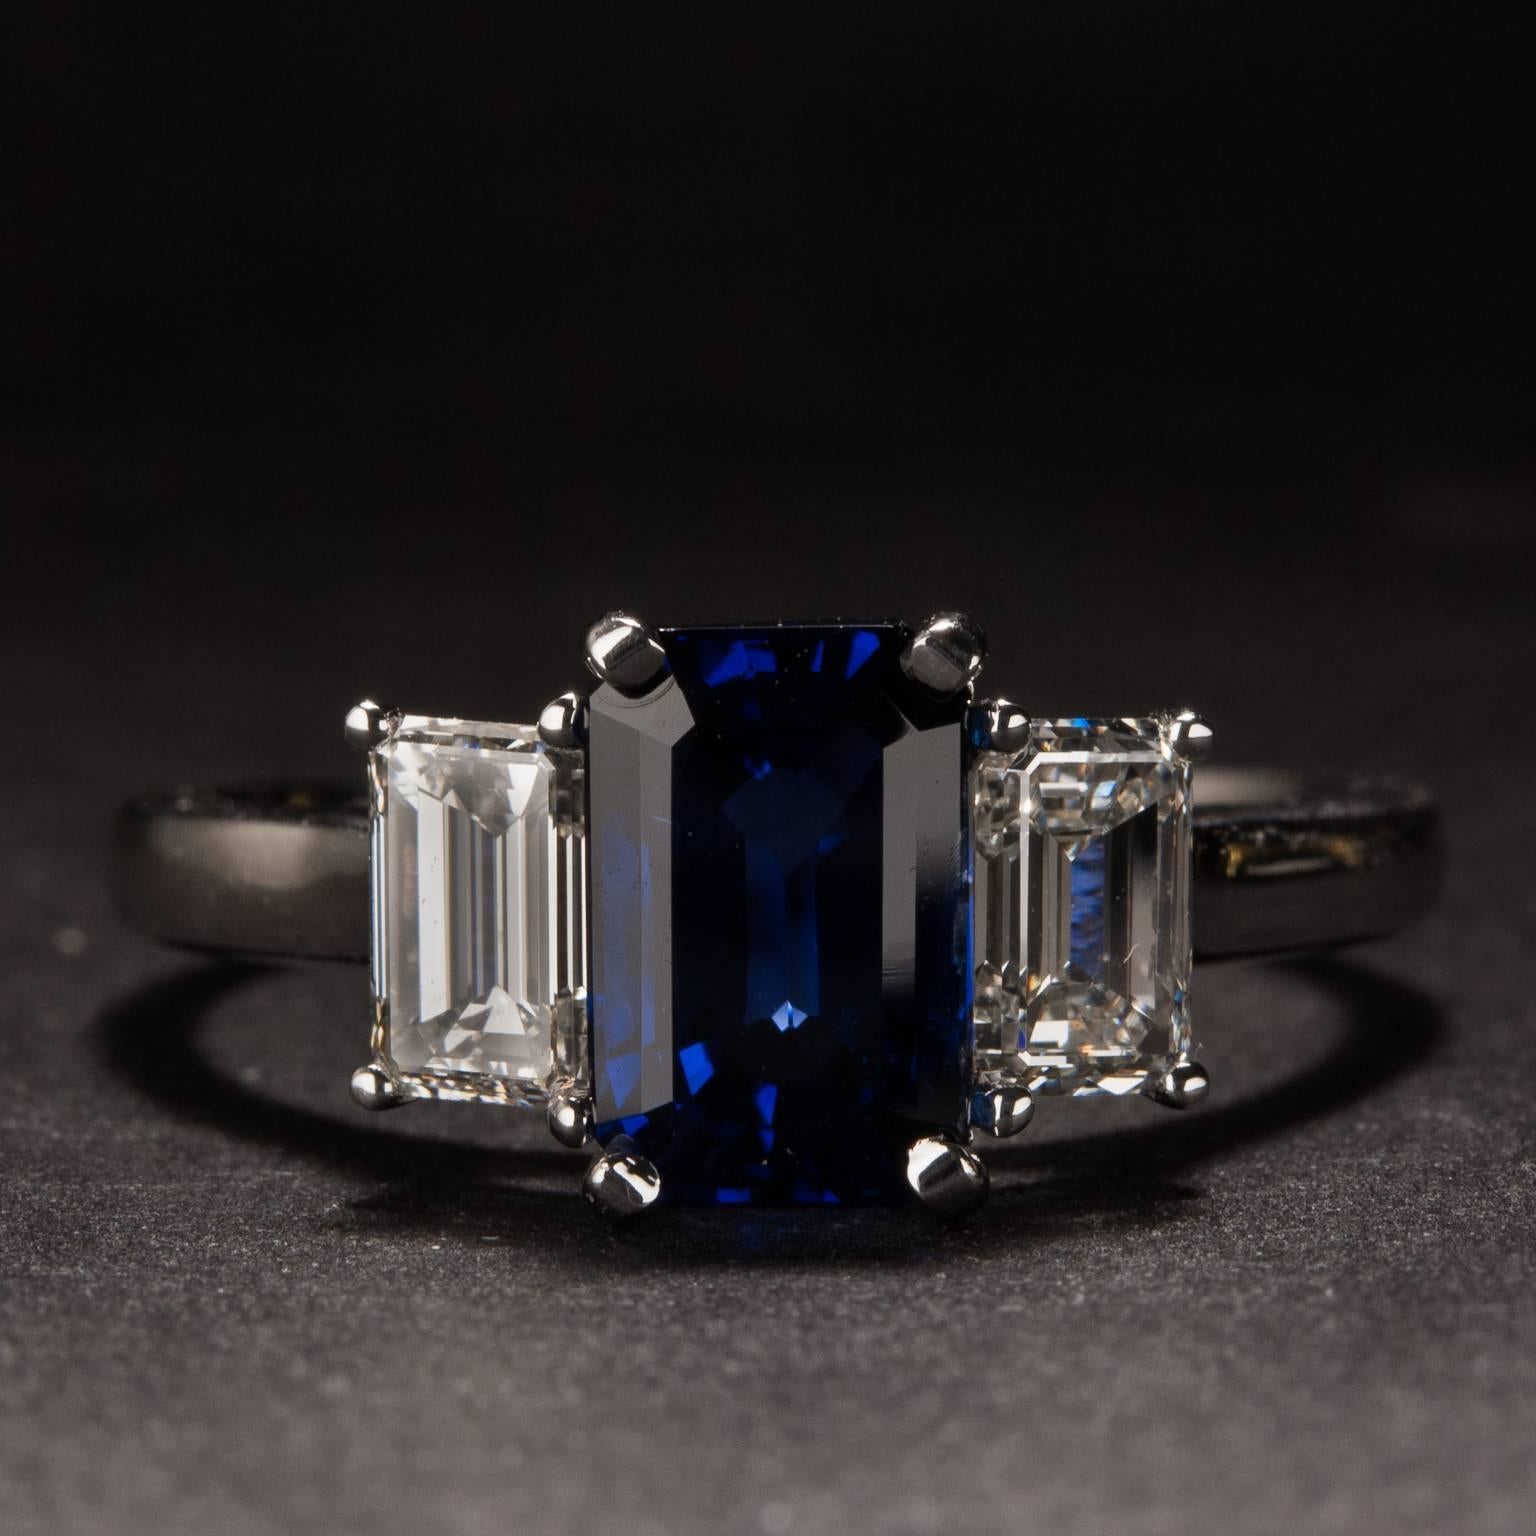 This stunning ring features an 1.37 carat center sapphire which is accent by two bright white emerald cut diamonds weighing a combined total of .70 carats. The mounting is crafted in 18k white gold and it is currently size 6.25.

This ring may be